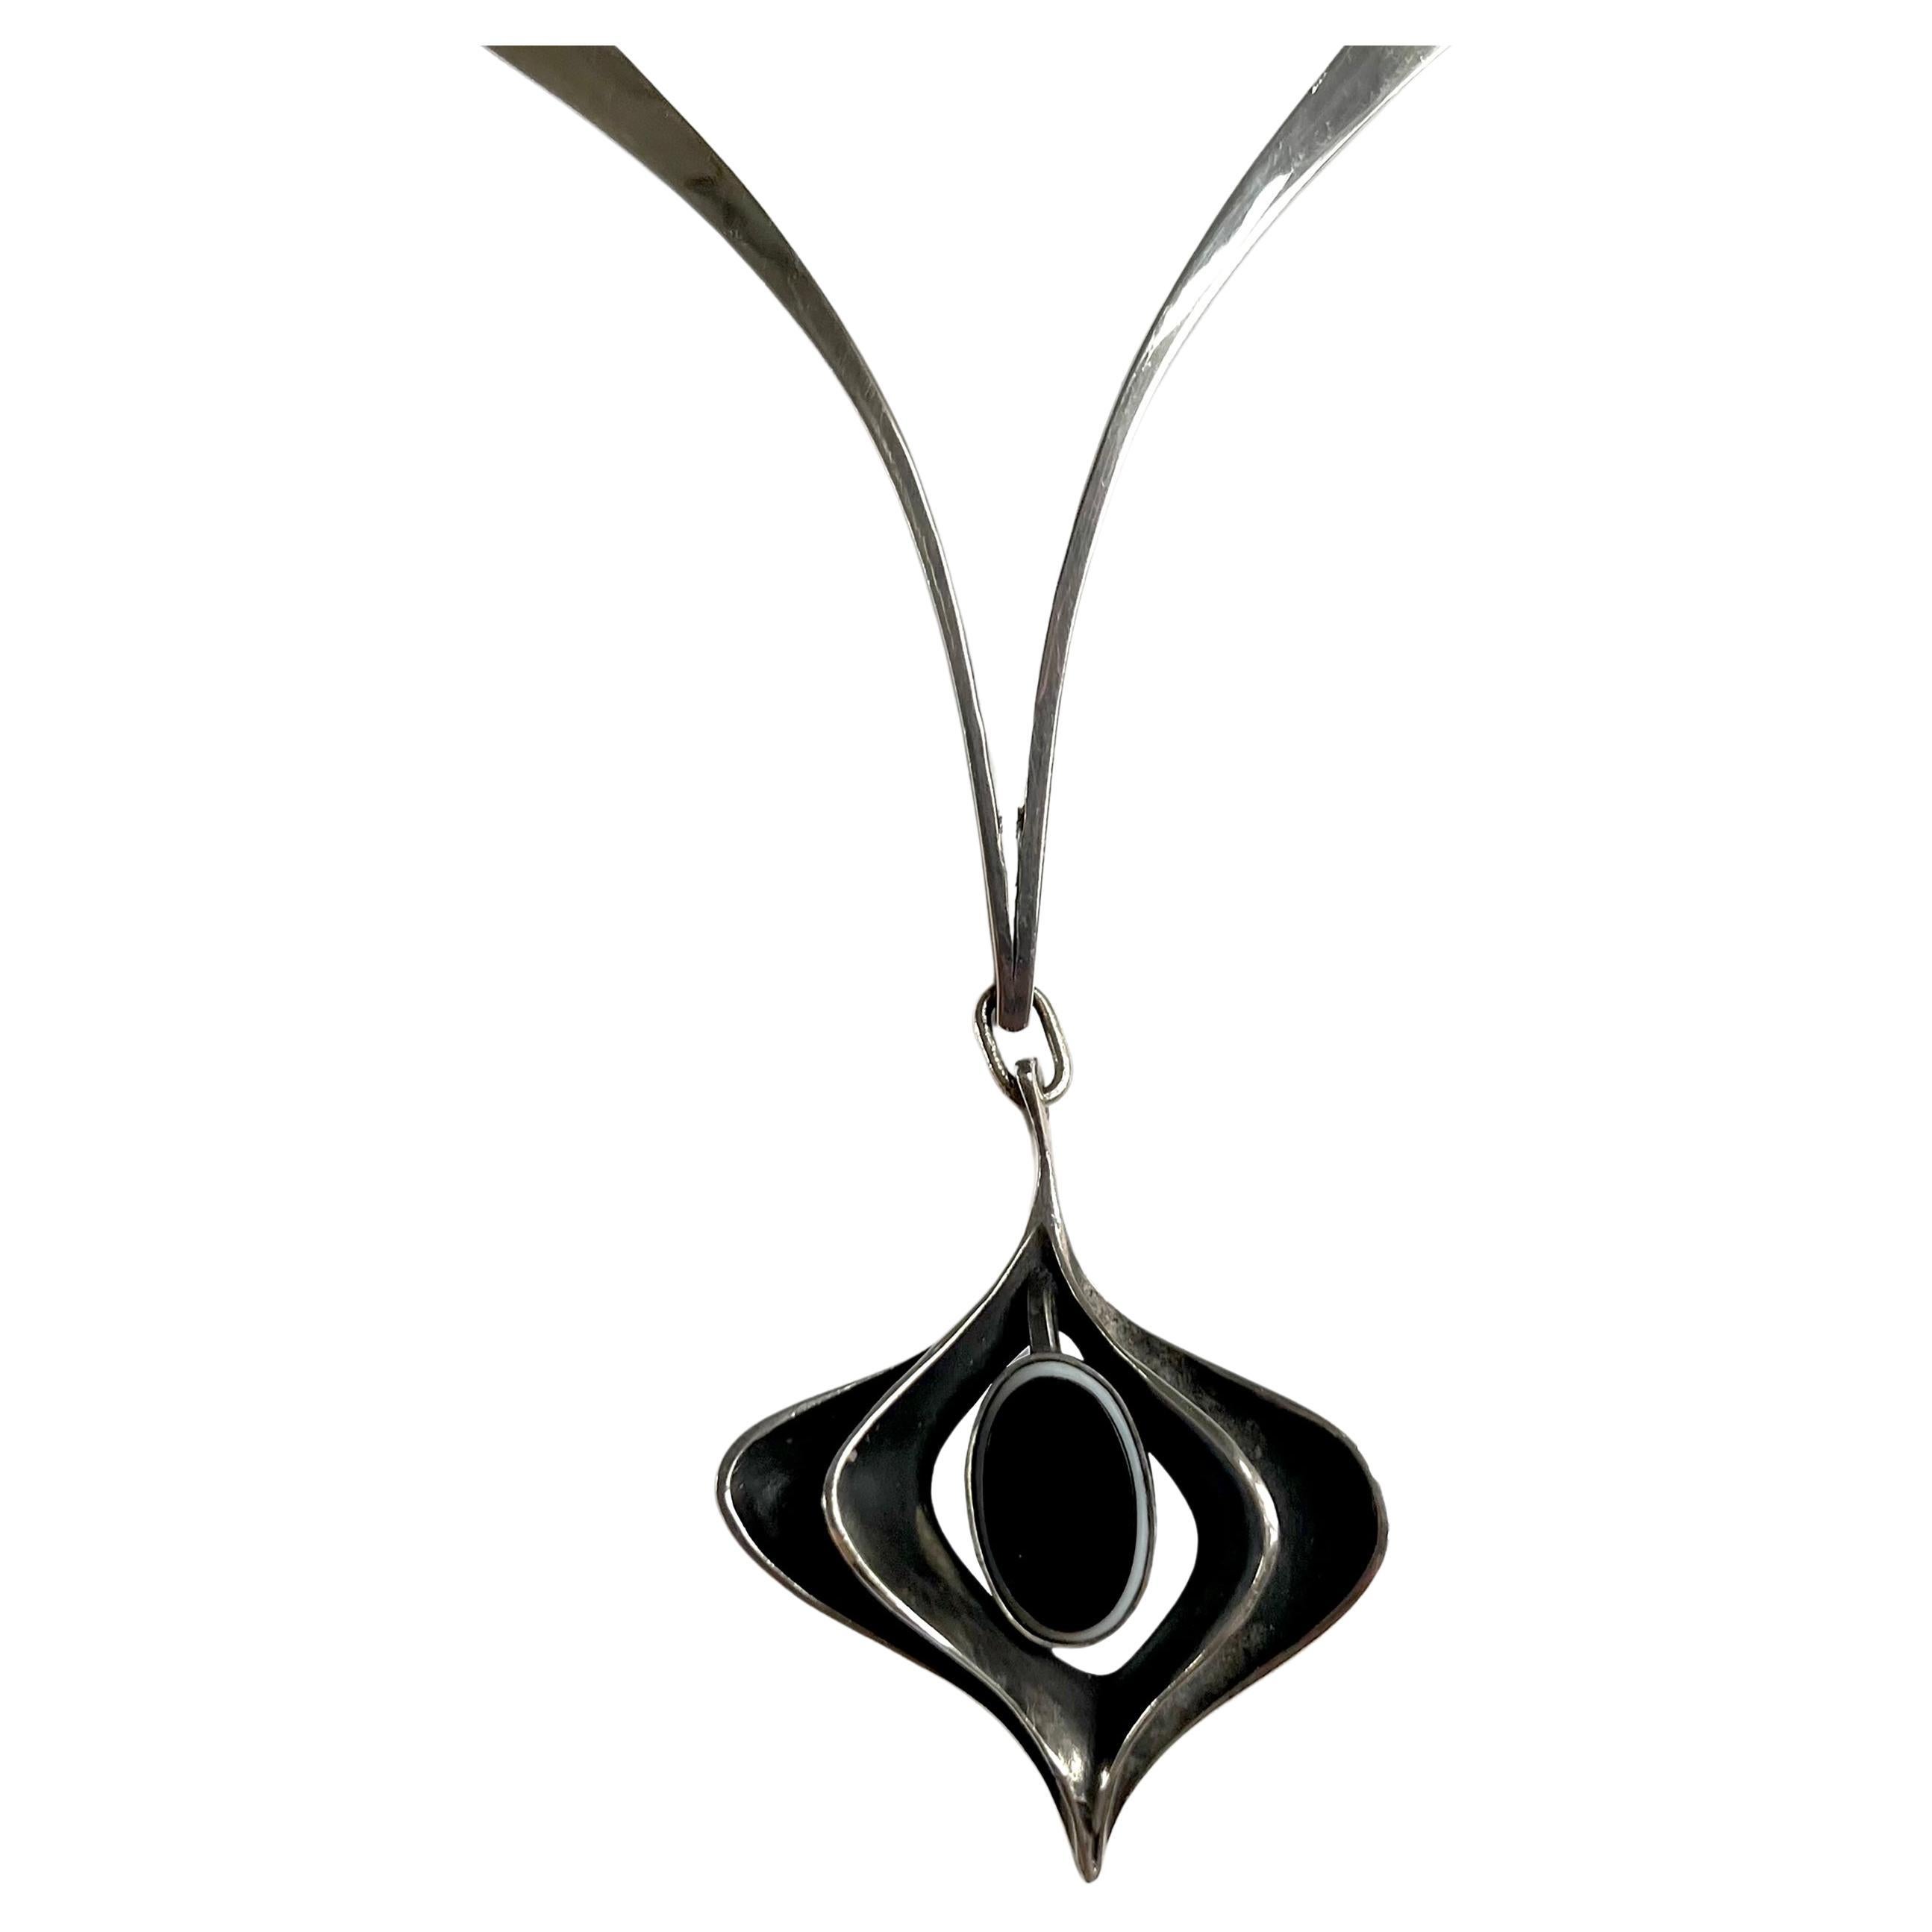 Sculptural pendant necklace with oval onyx stone at its center, created by Ronald Hayes Pearson  (1924-1996) of Rochester, New York.  Necklace has a wearable neck length of approximately 17